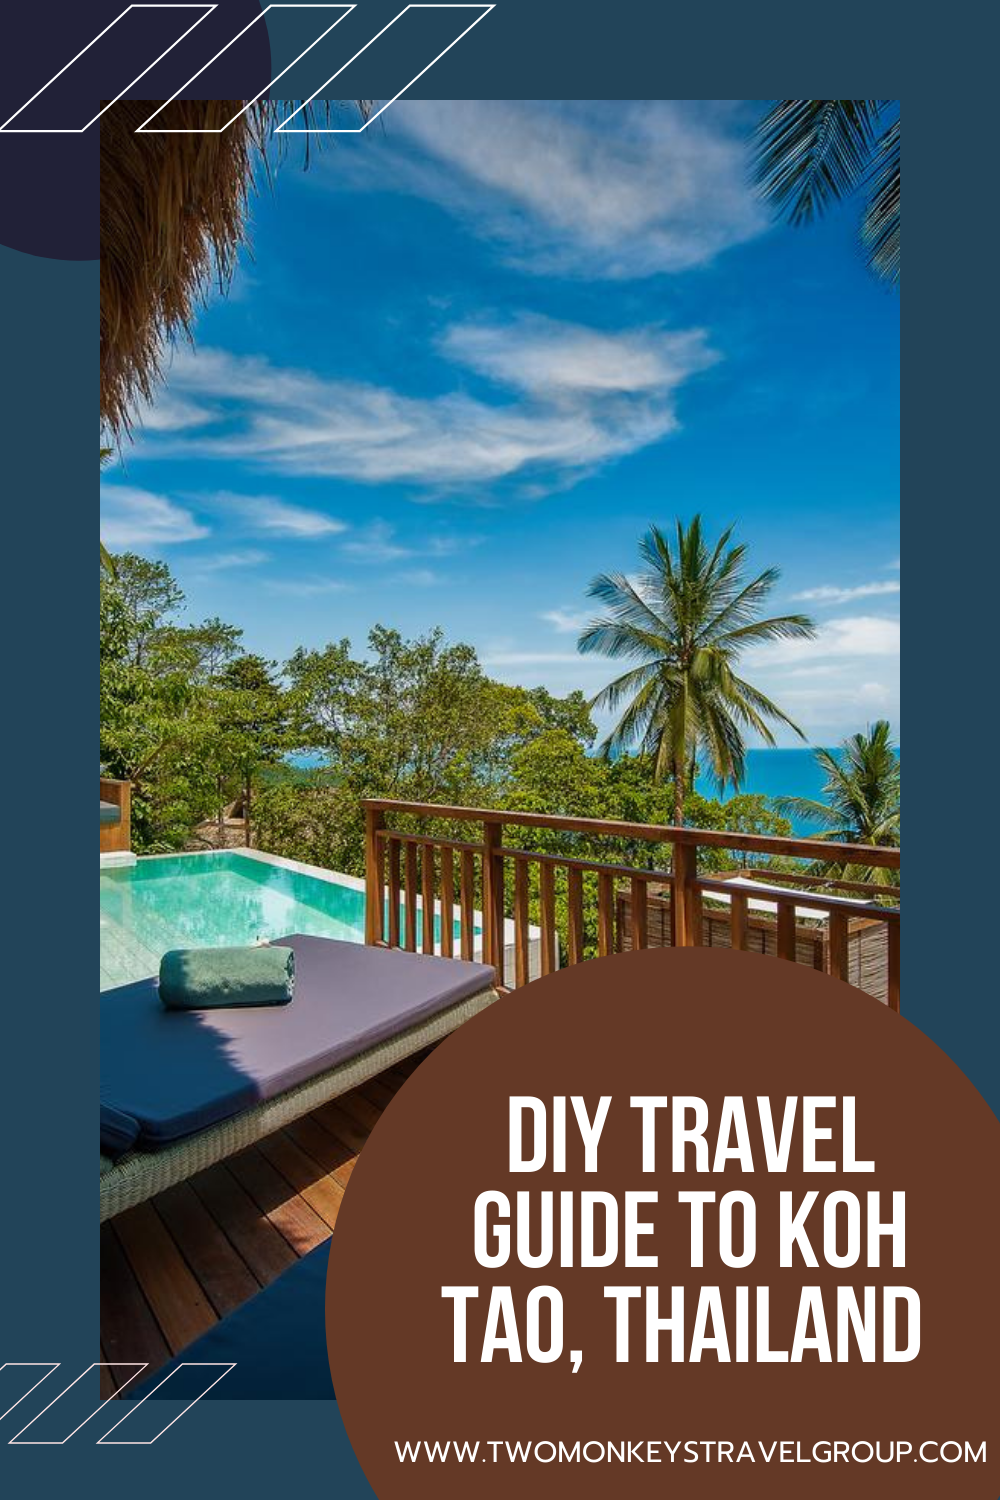 DIY Travel Guide to Koh Tao, Thailand [With Suggested Tours]